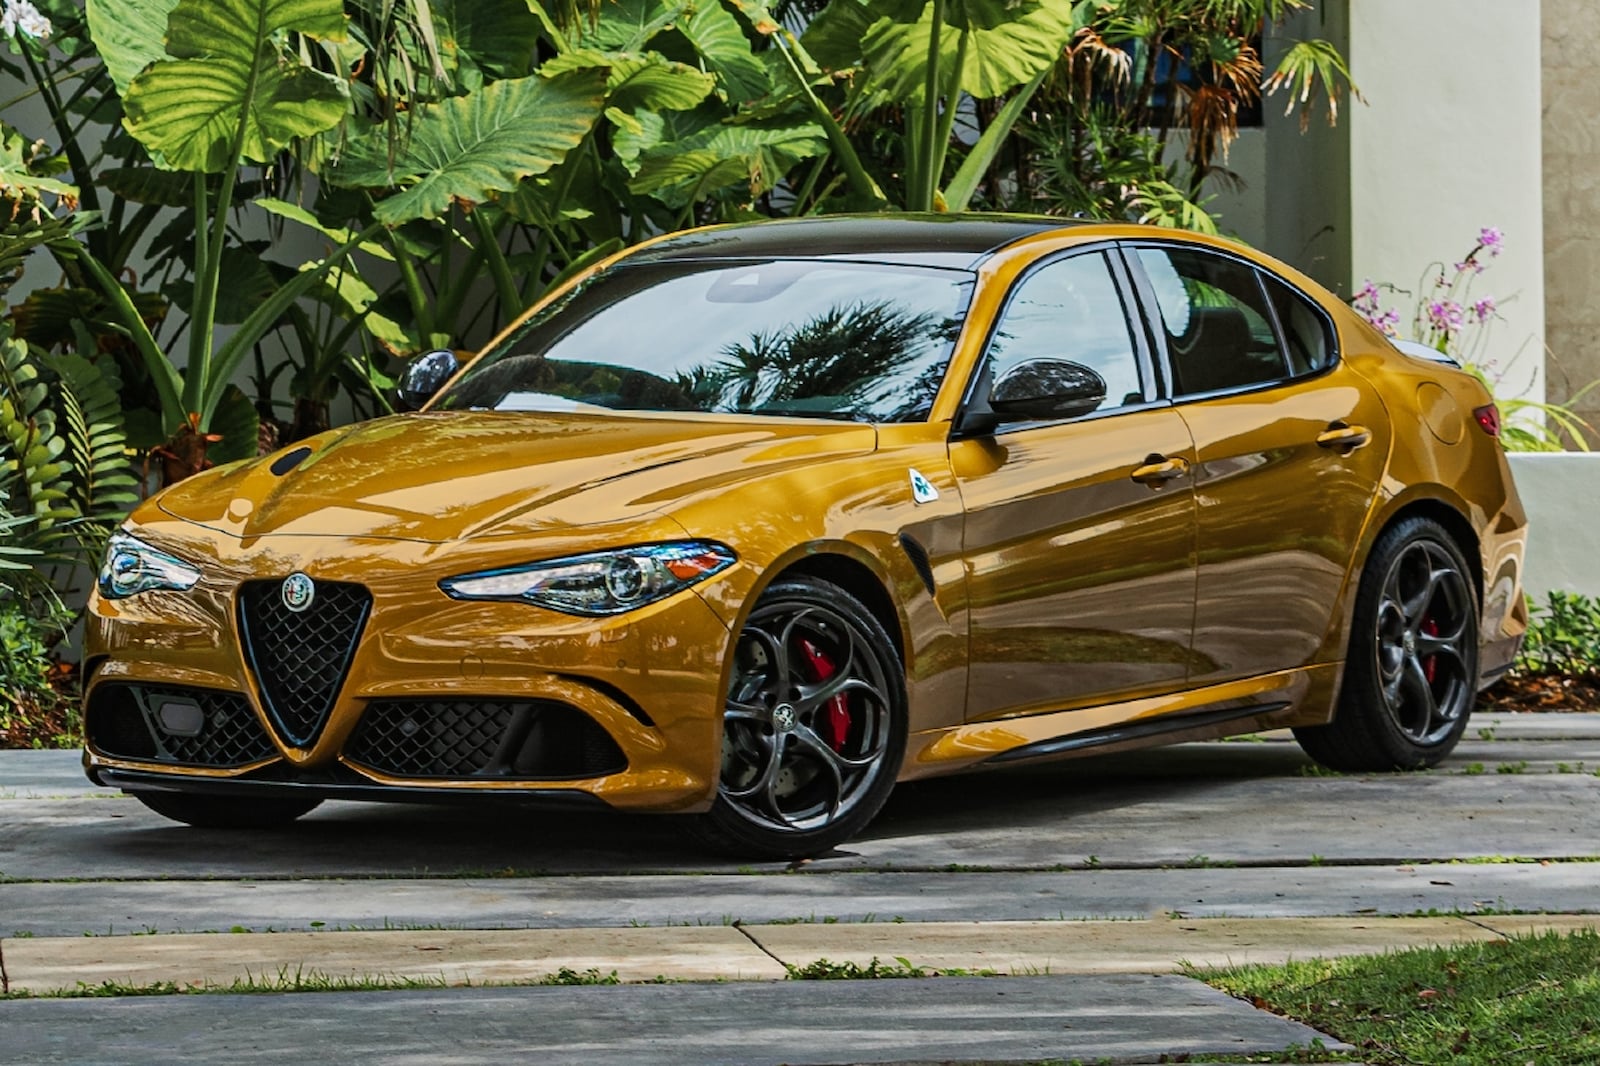 Alfa Romeo Car and SUV List: Price, Reviews, and Specs